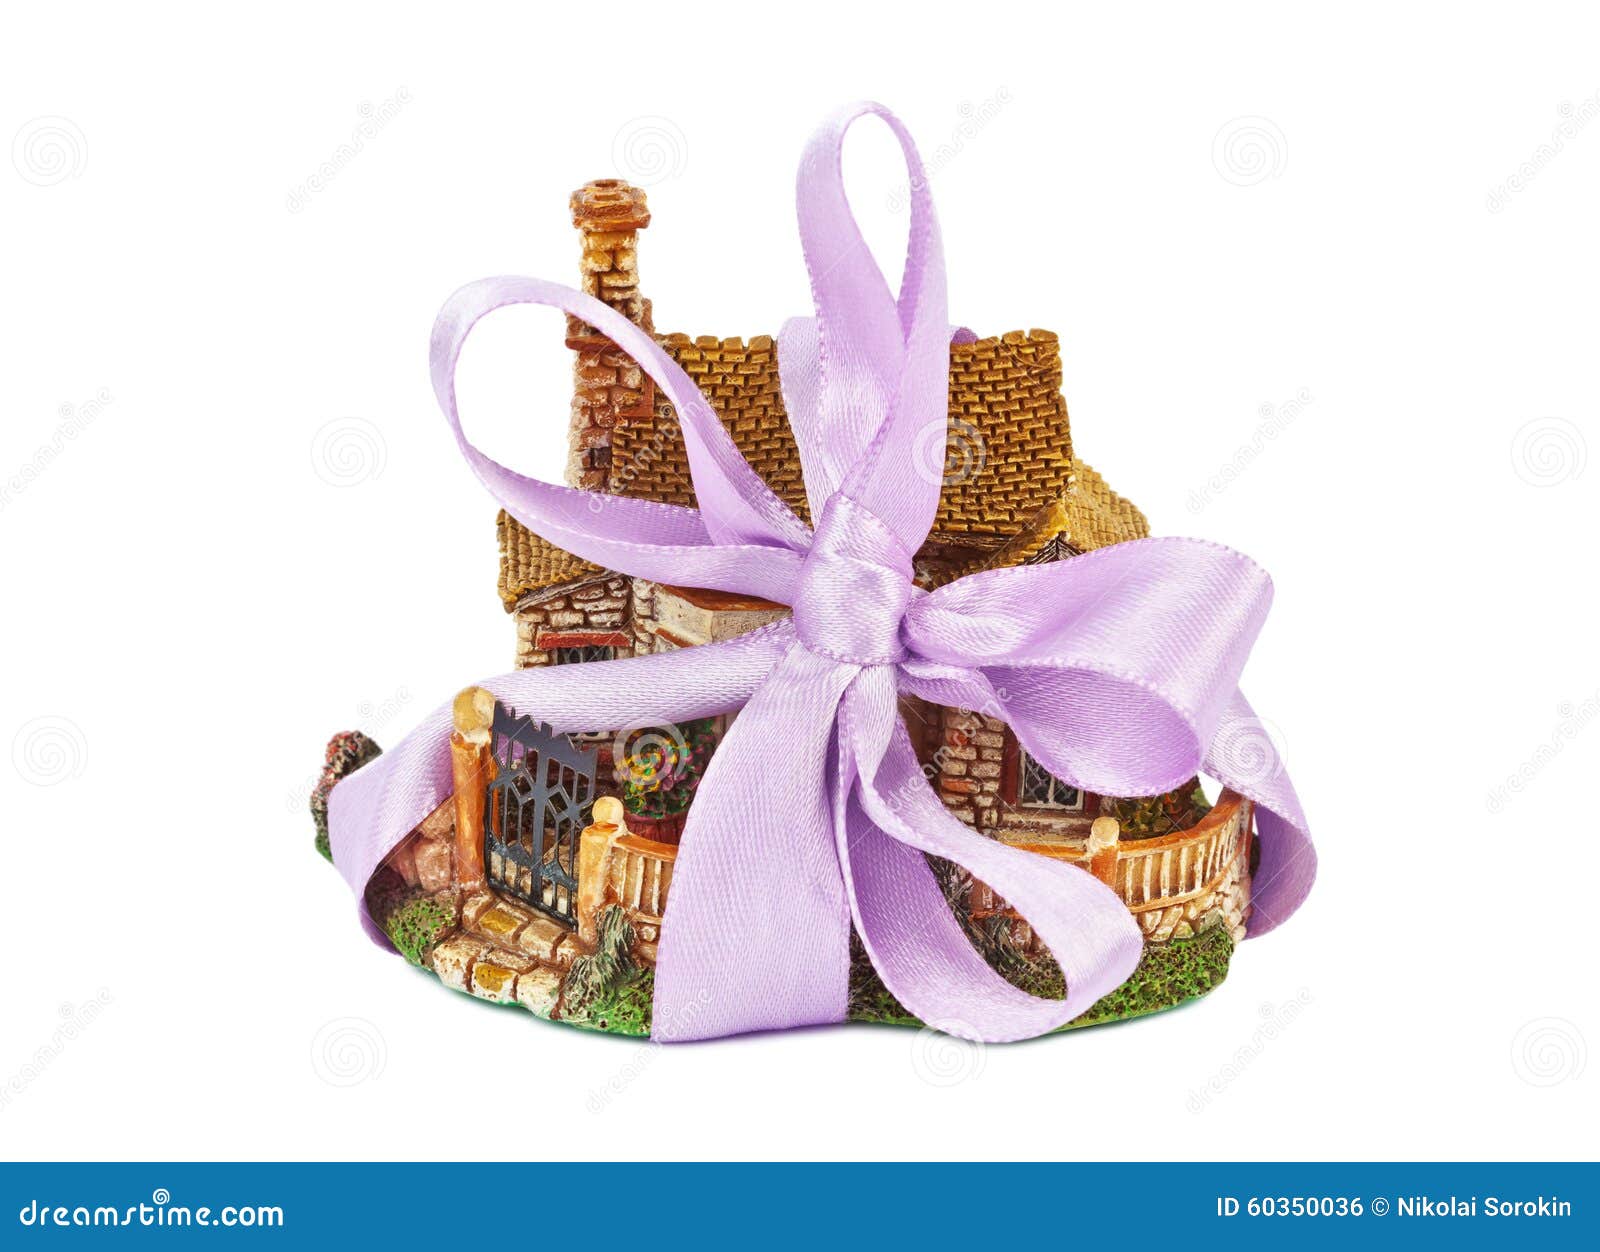 House Gift. Mansion With Ribbon And Bow. 3d Stock Photo, Picture and  Royalty Free Image. Image 17875676.